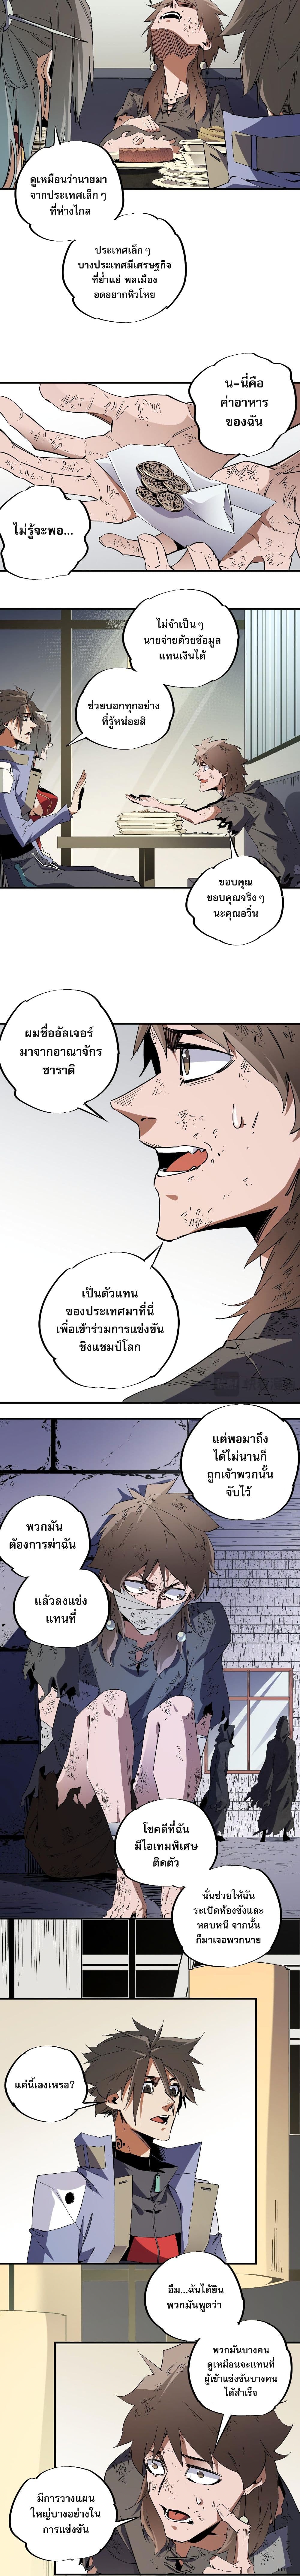 Job Changing for the Entire Population: The Jobless Me Will Terminate the Gods ฉันคือผู้เล่นไร้อาชีพที่สังหารเหล่าเทพ 61-61